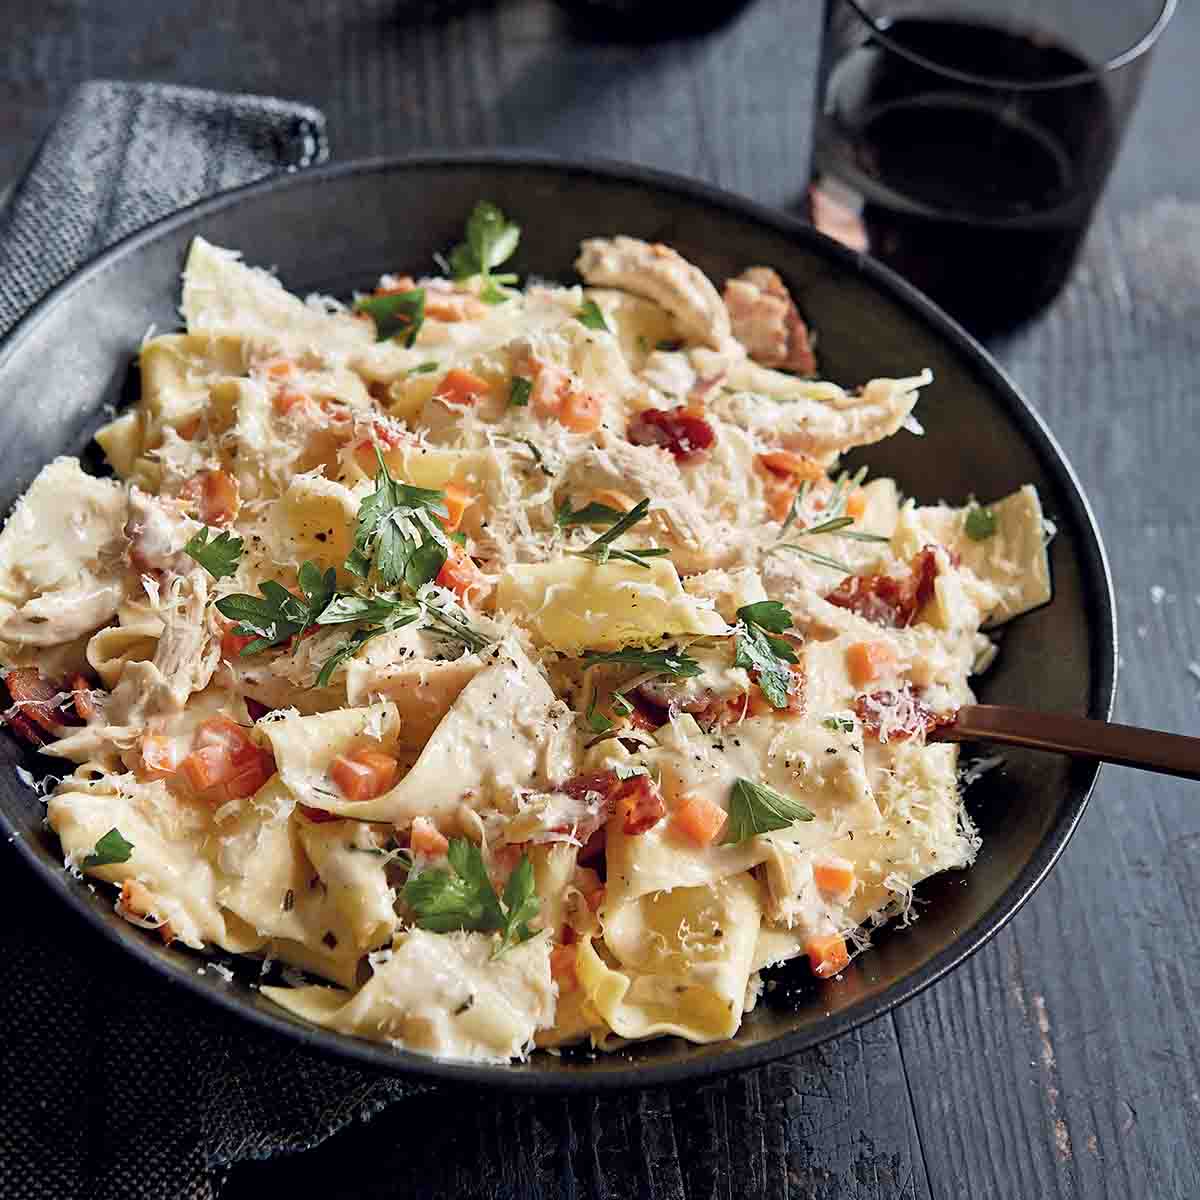 Creamy pappardelle with chicken and bacon in a black bowl with a fork, topped with grated cheese.